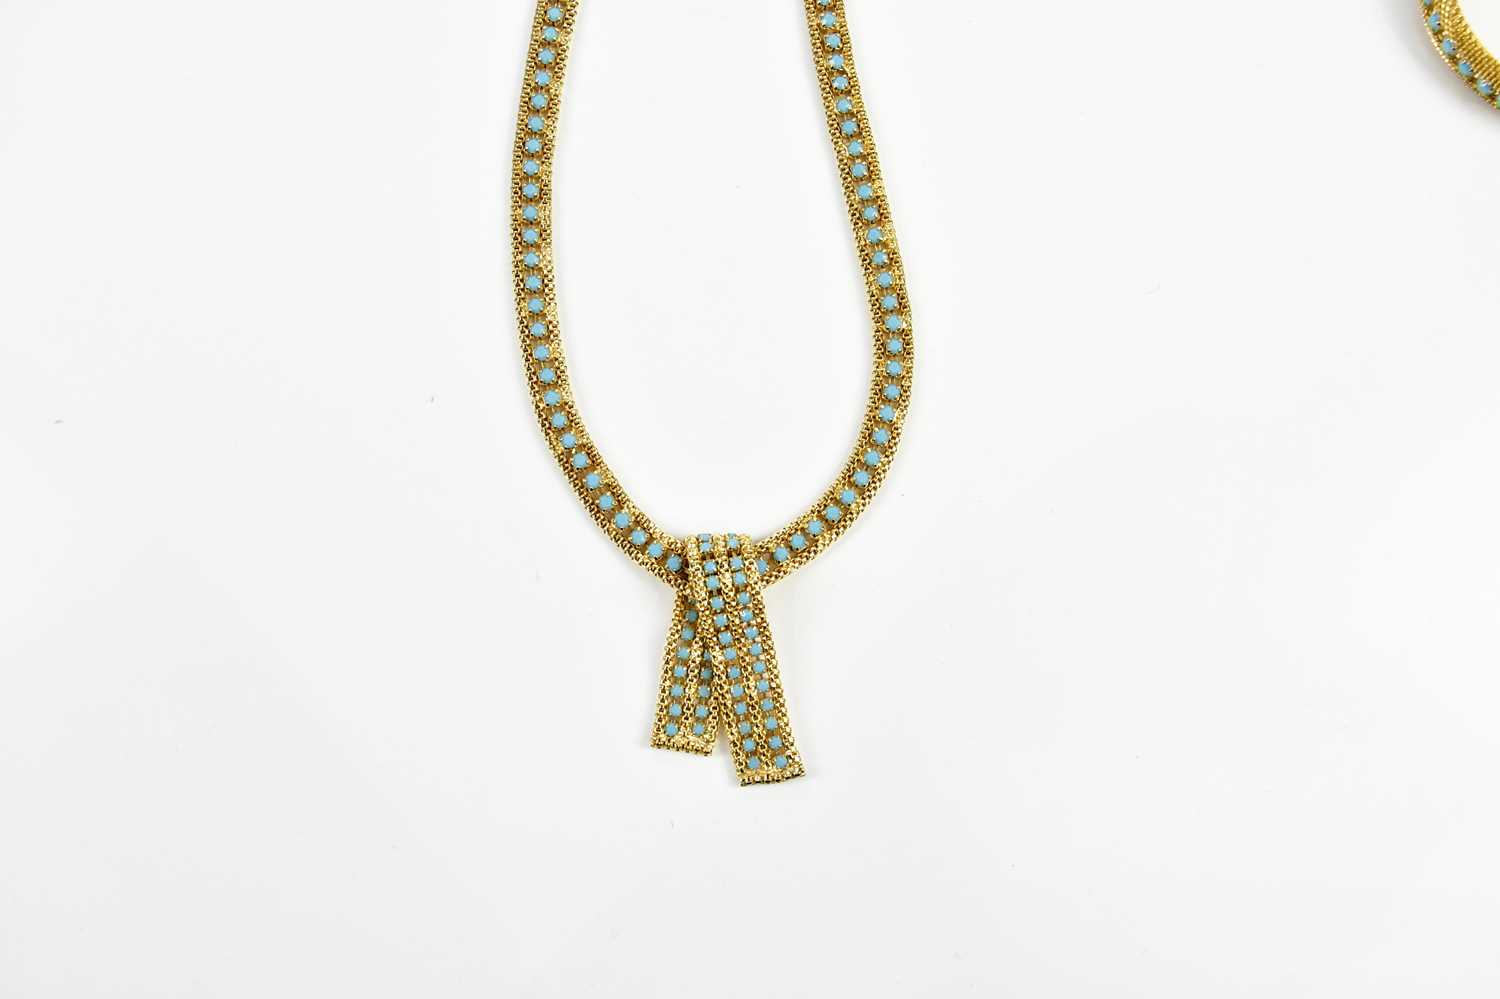 A decorative Eastern necklace and bangle set with turquoise coloured stones (2). - Image 2 of 4